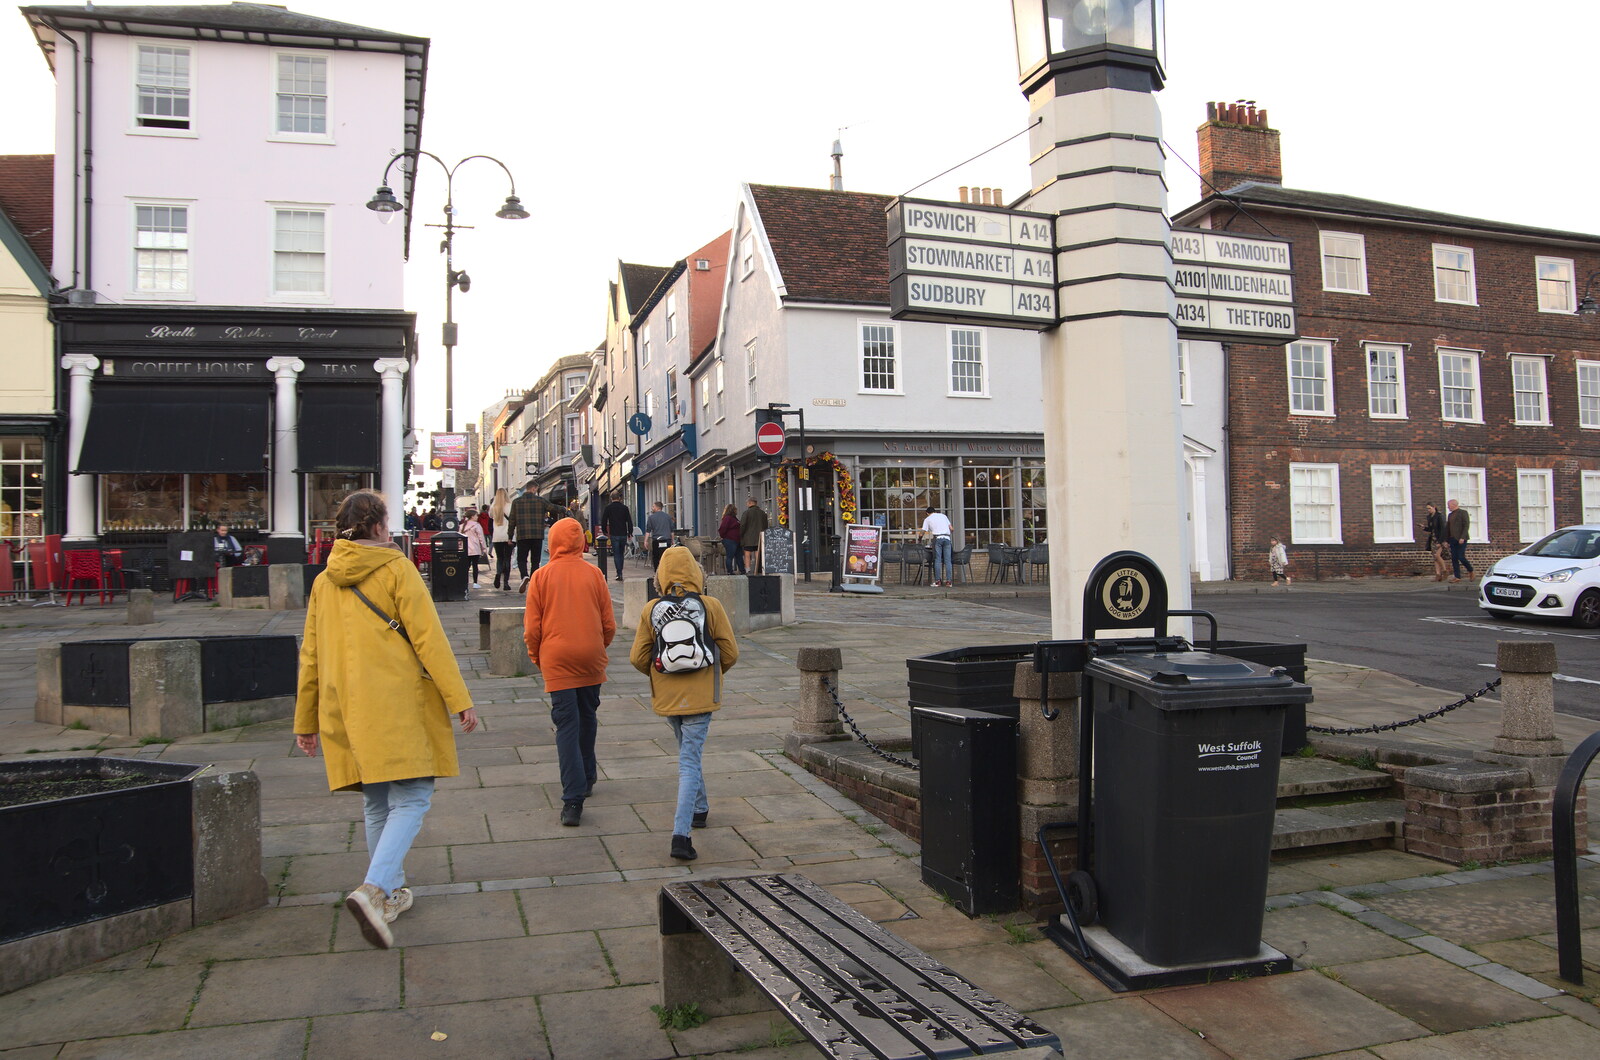 Pizza and Pasta in Bury St. Edmunds, Suffolk - 30th October 2022: We head off back up Abbeygate